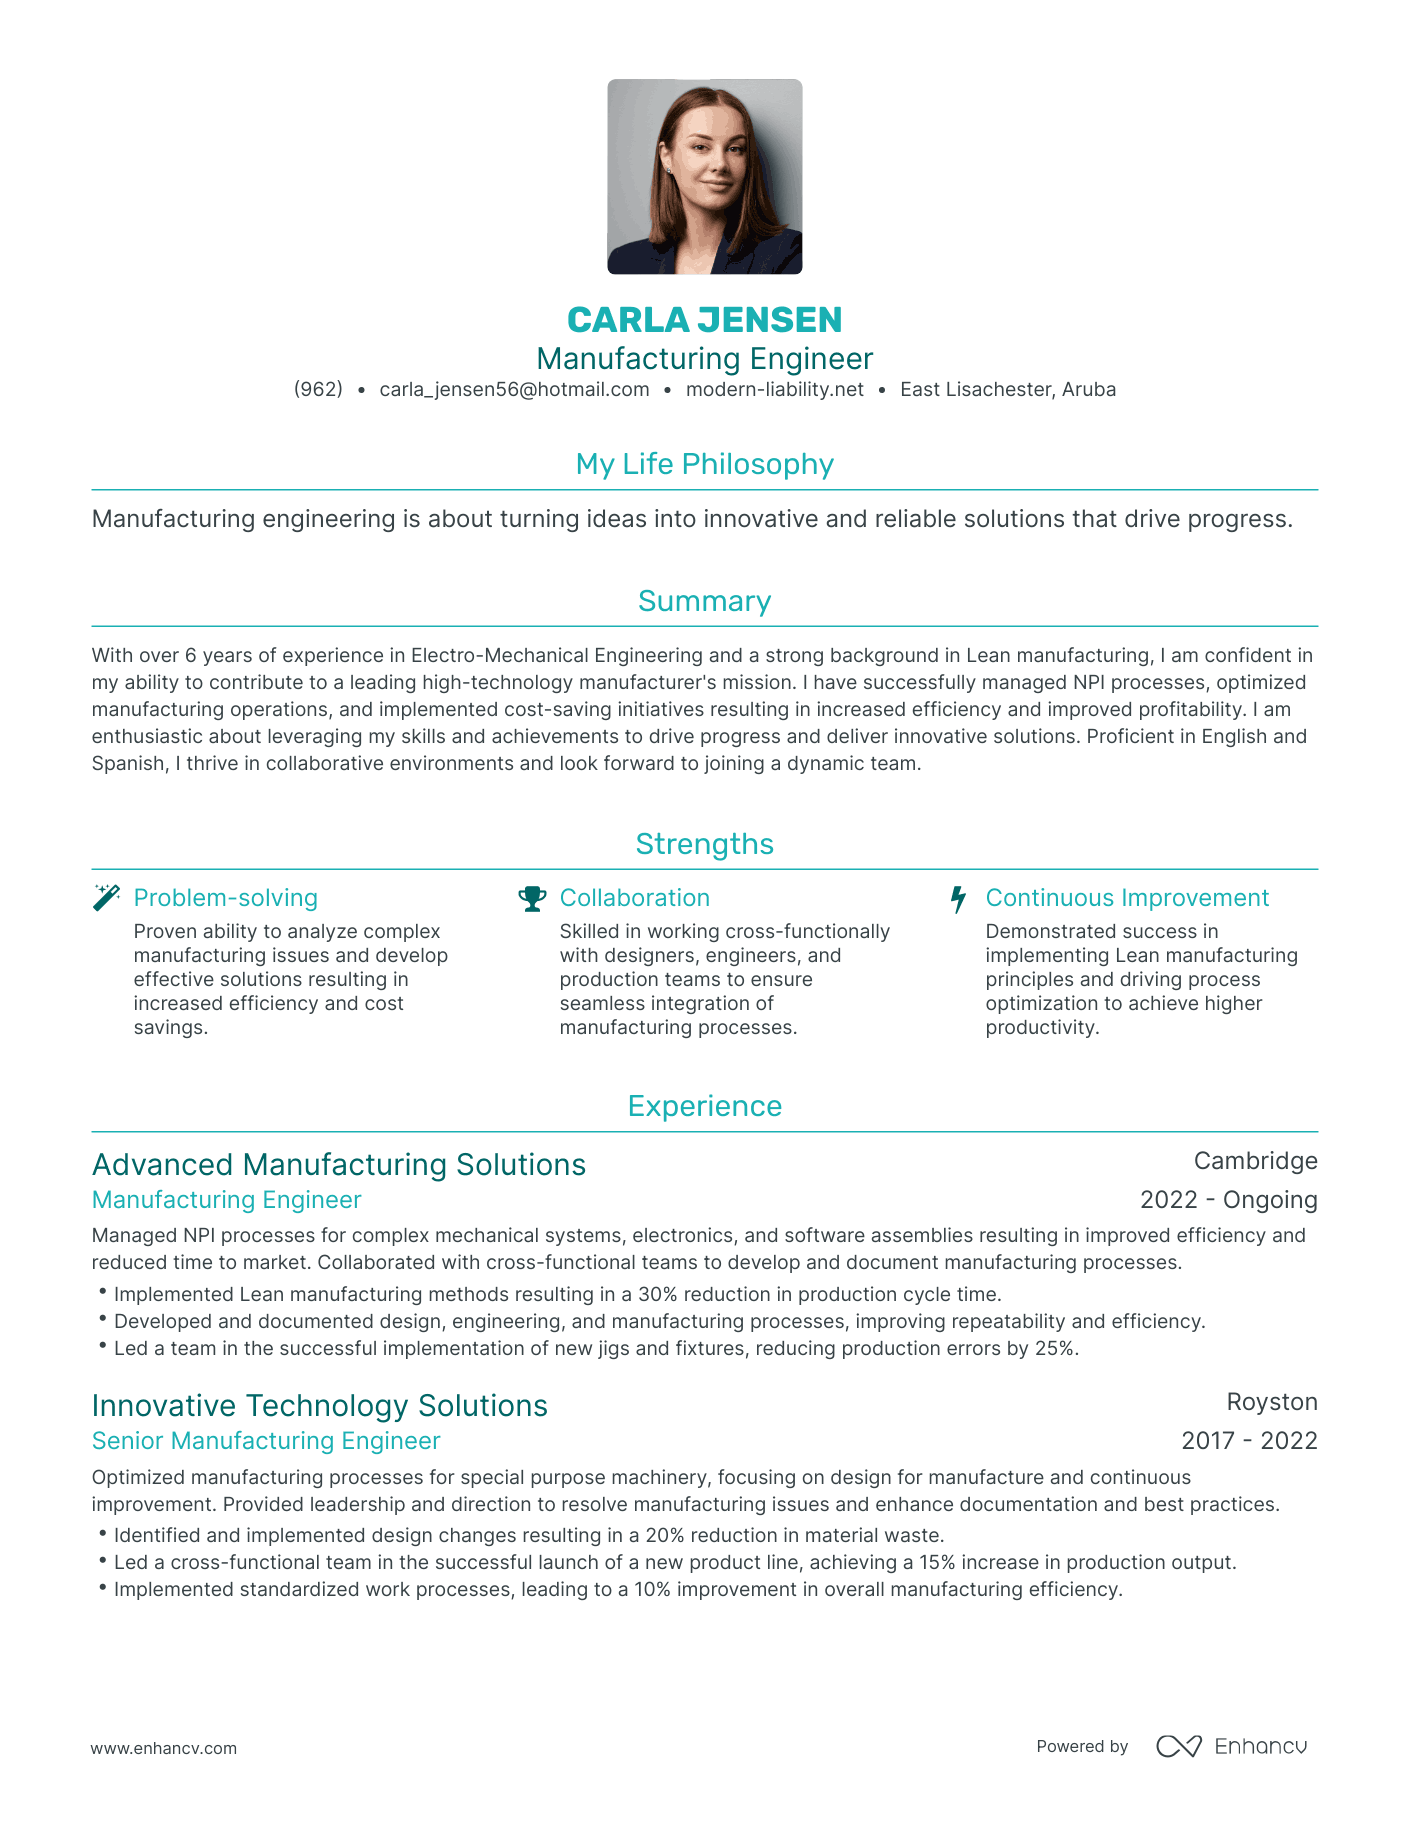 3 Manufacturing Engineer Resume Examples & How-To Guide for 2023